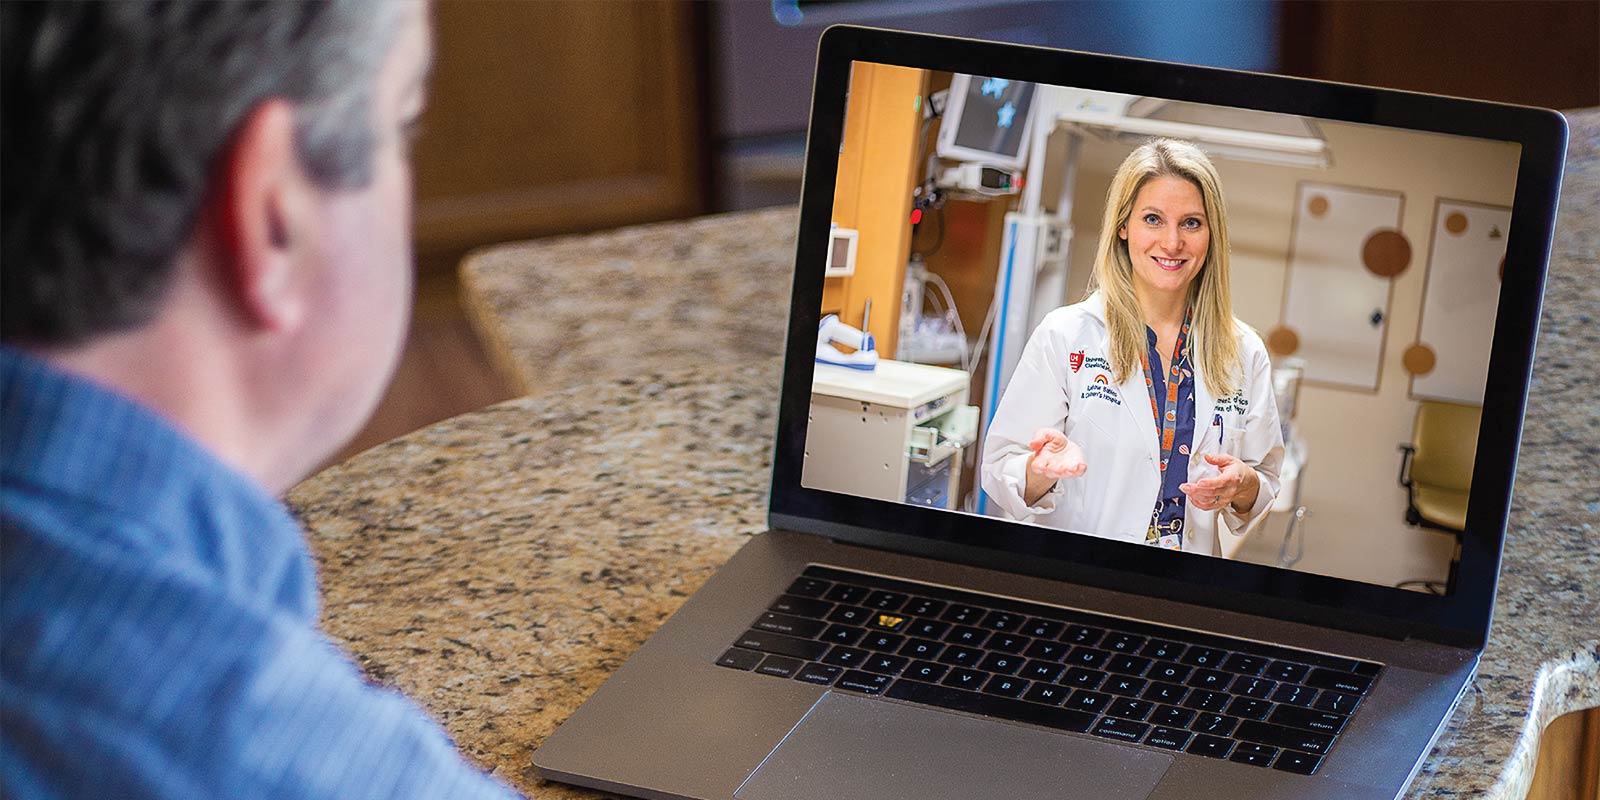 UH telehealth provides convenient care when you need it, where you need it